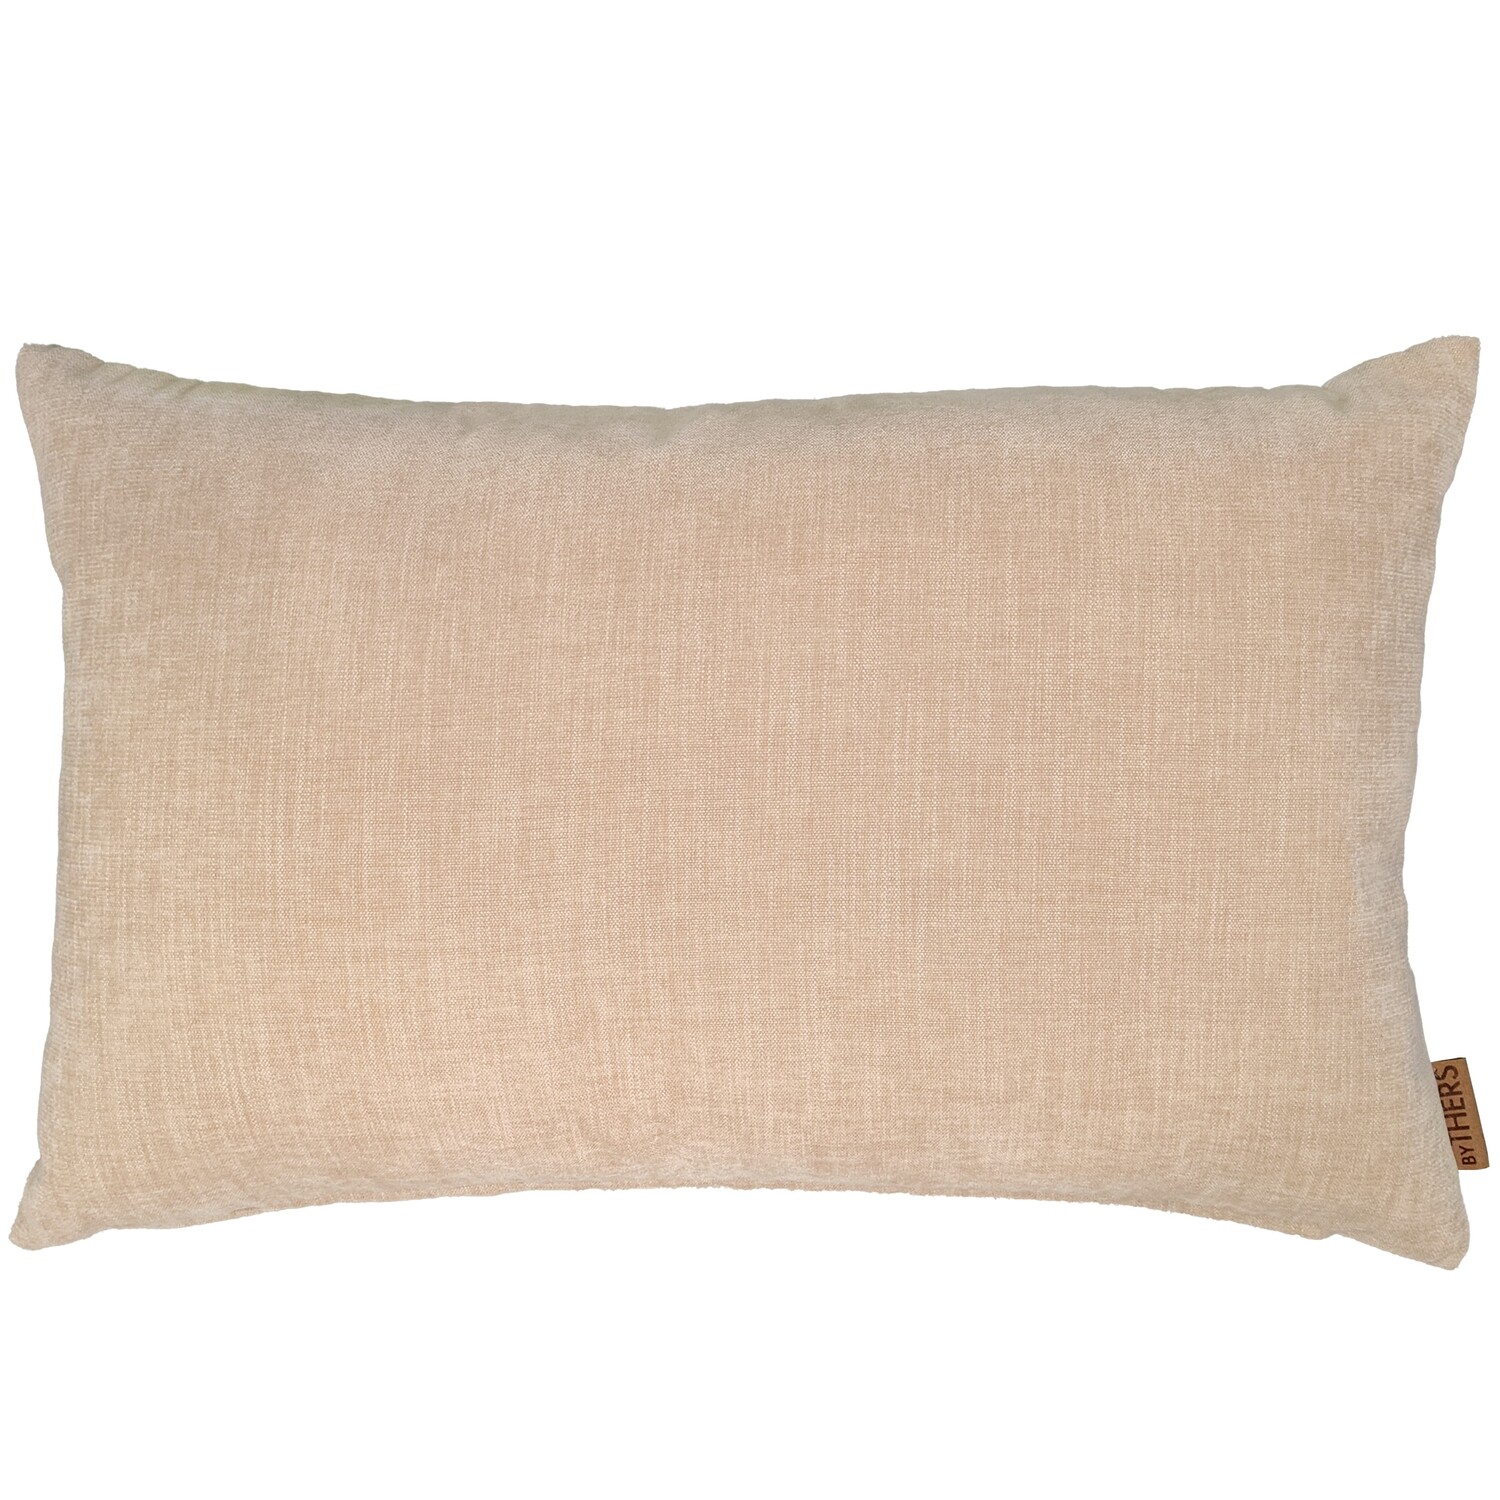 Beige chenille pude - Aflang